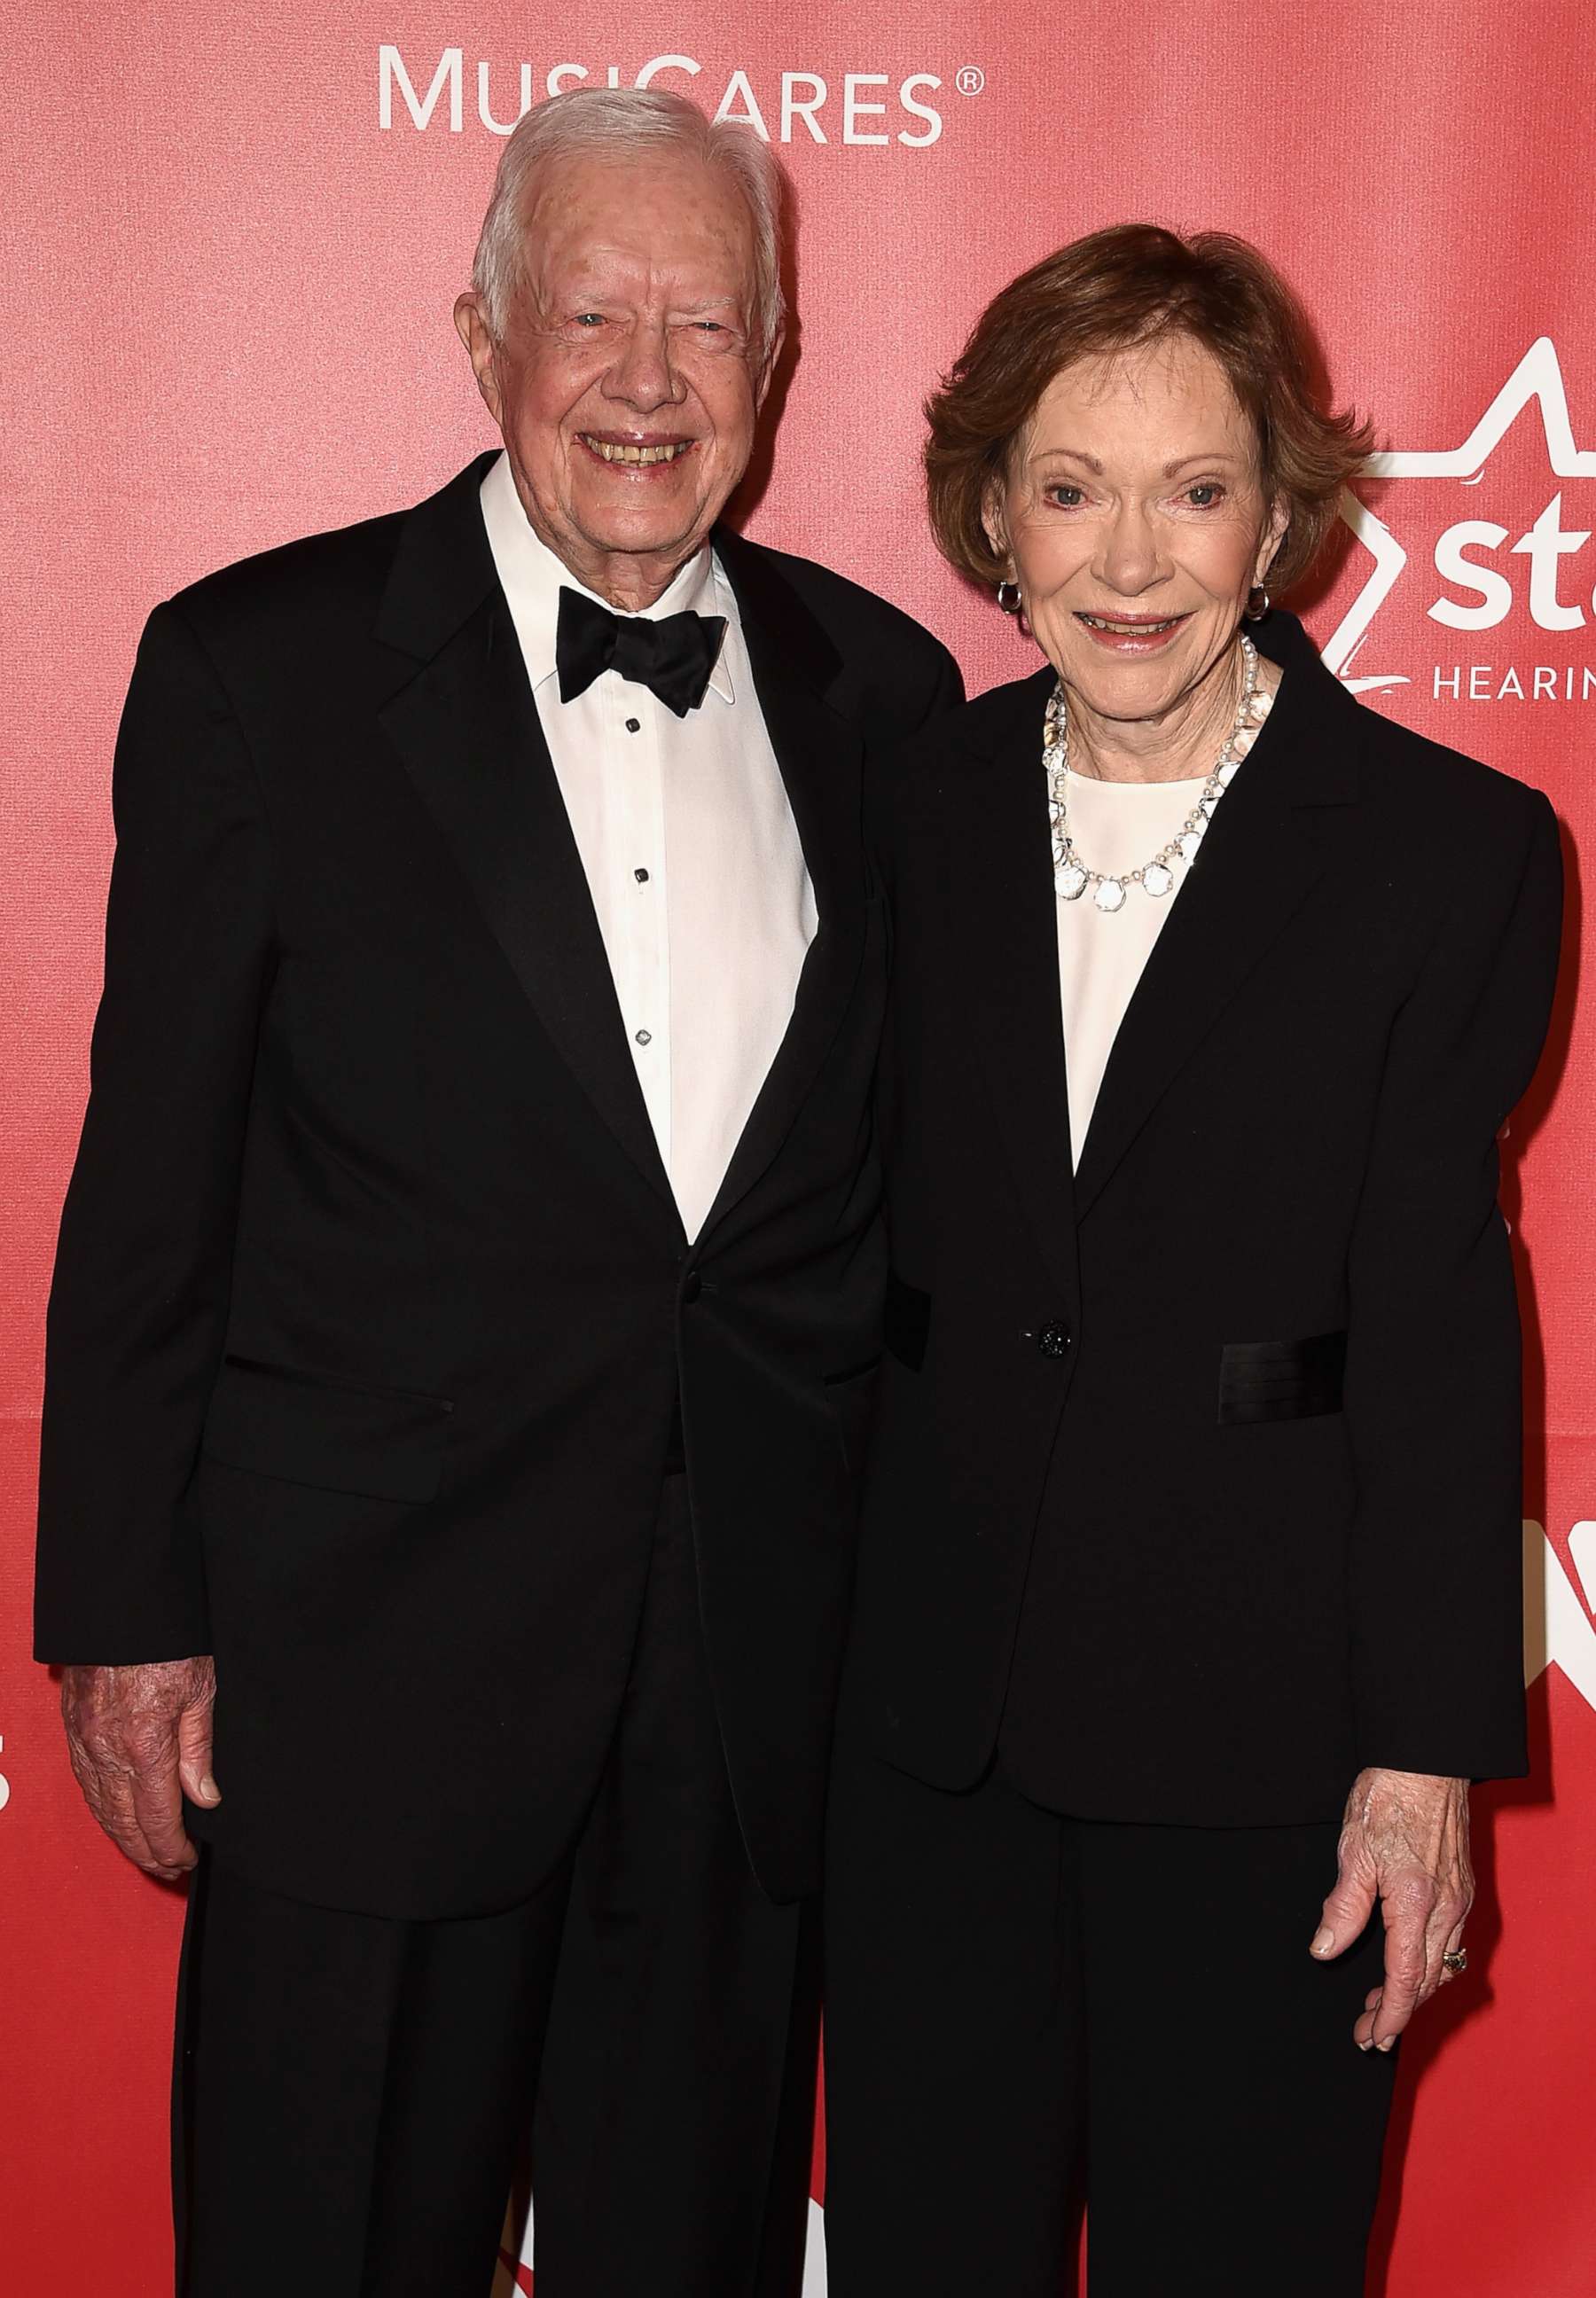 PHOTO: Former President Jimmy Carter and Rosalynn Carter attend the 25th anniversary MusiCares 2015 Person Of The Year Gala honoring Bob Dylan at the Los Angeles Convention Center in Los Angeles, Feb. 6, 2015.